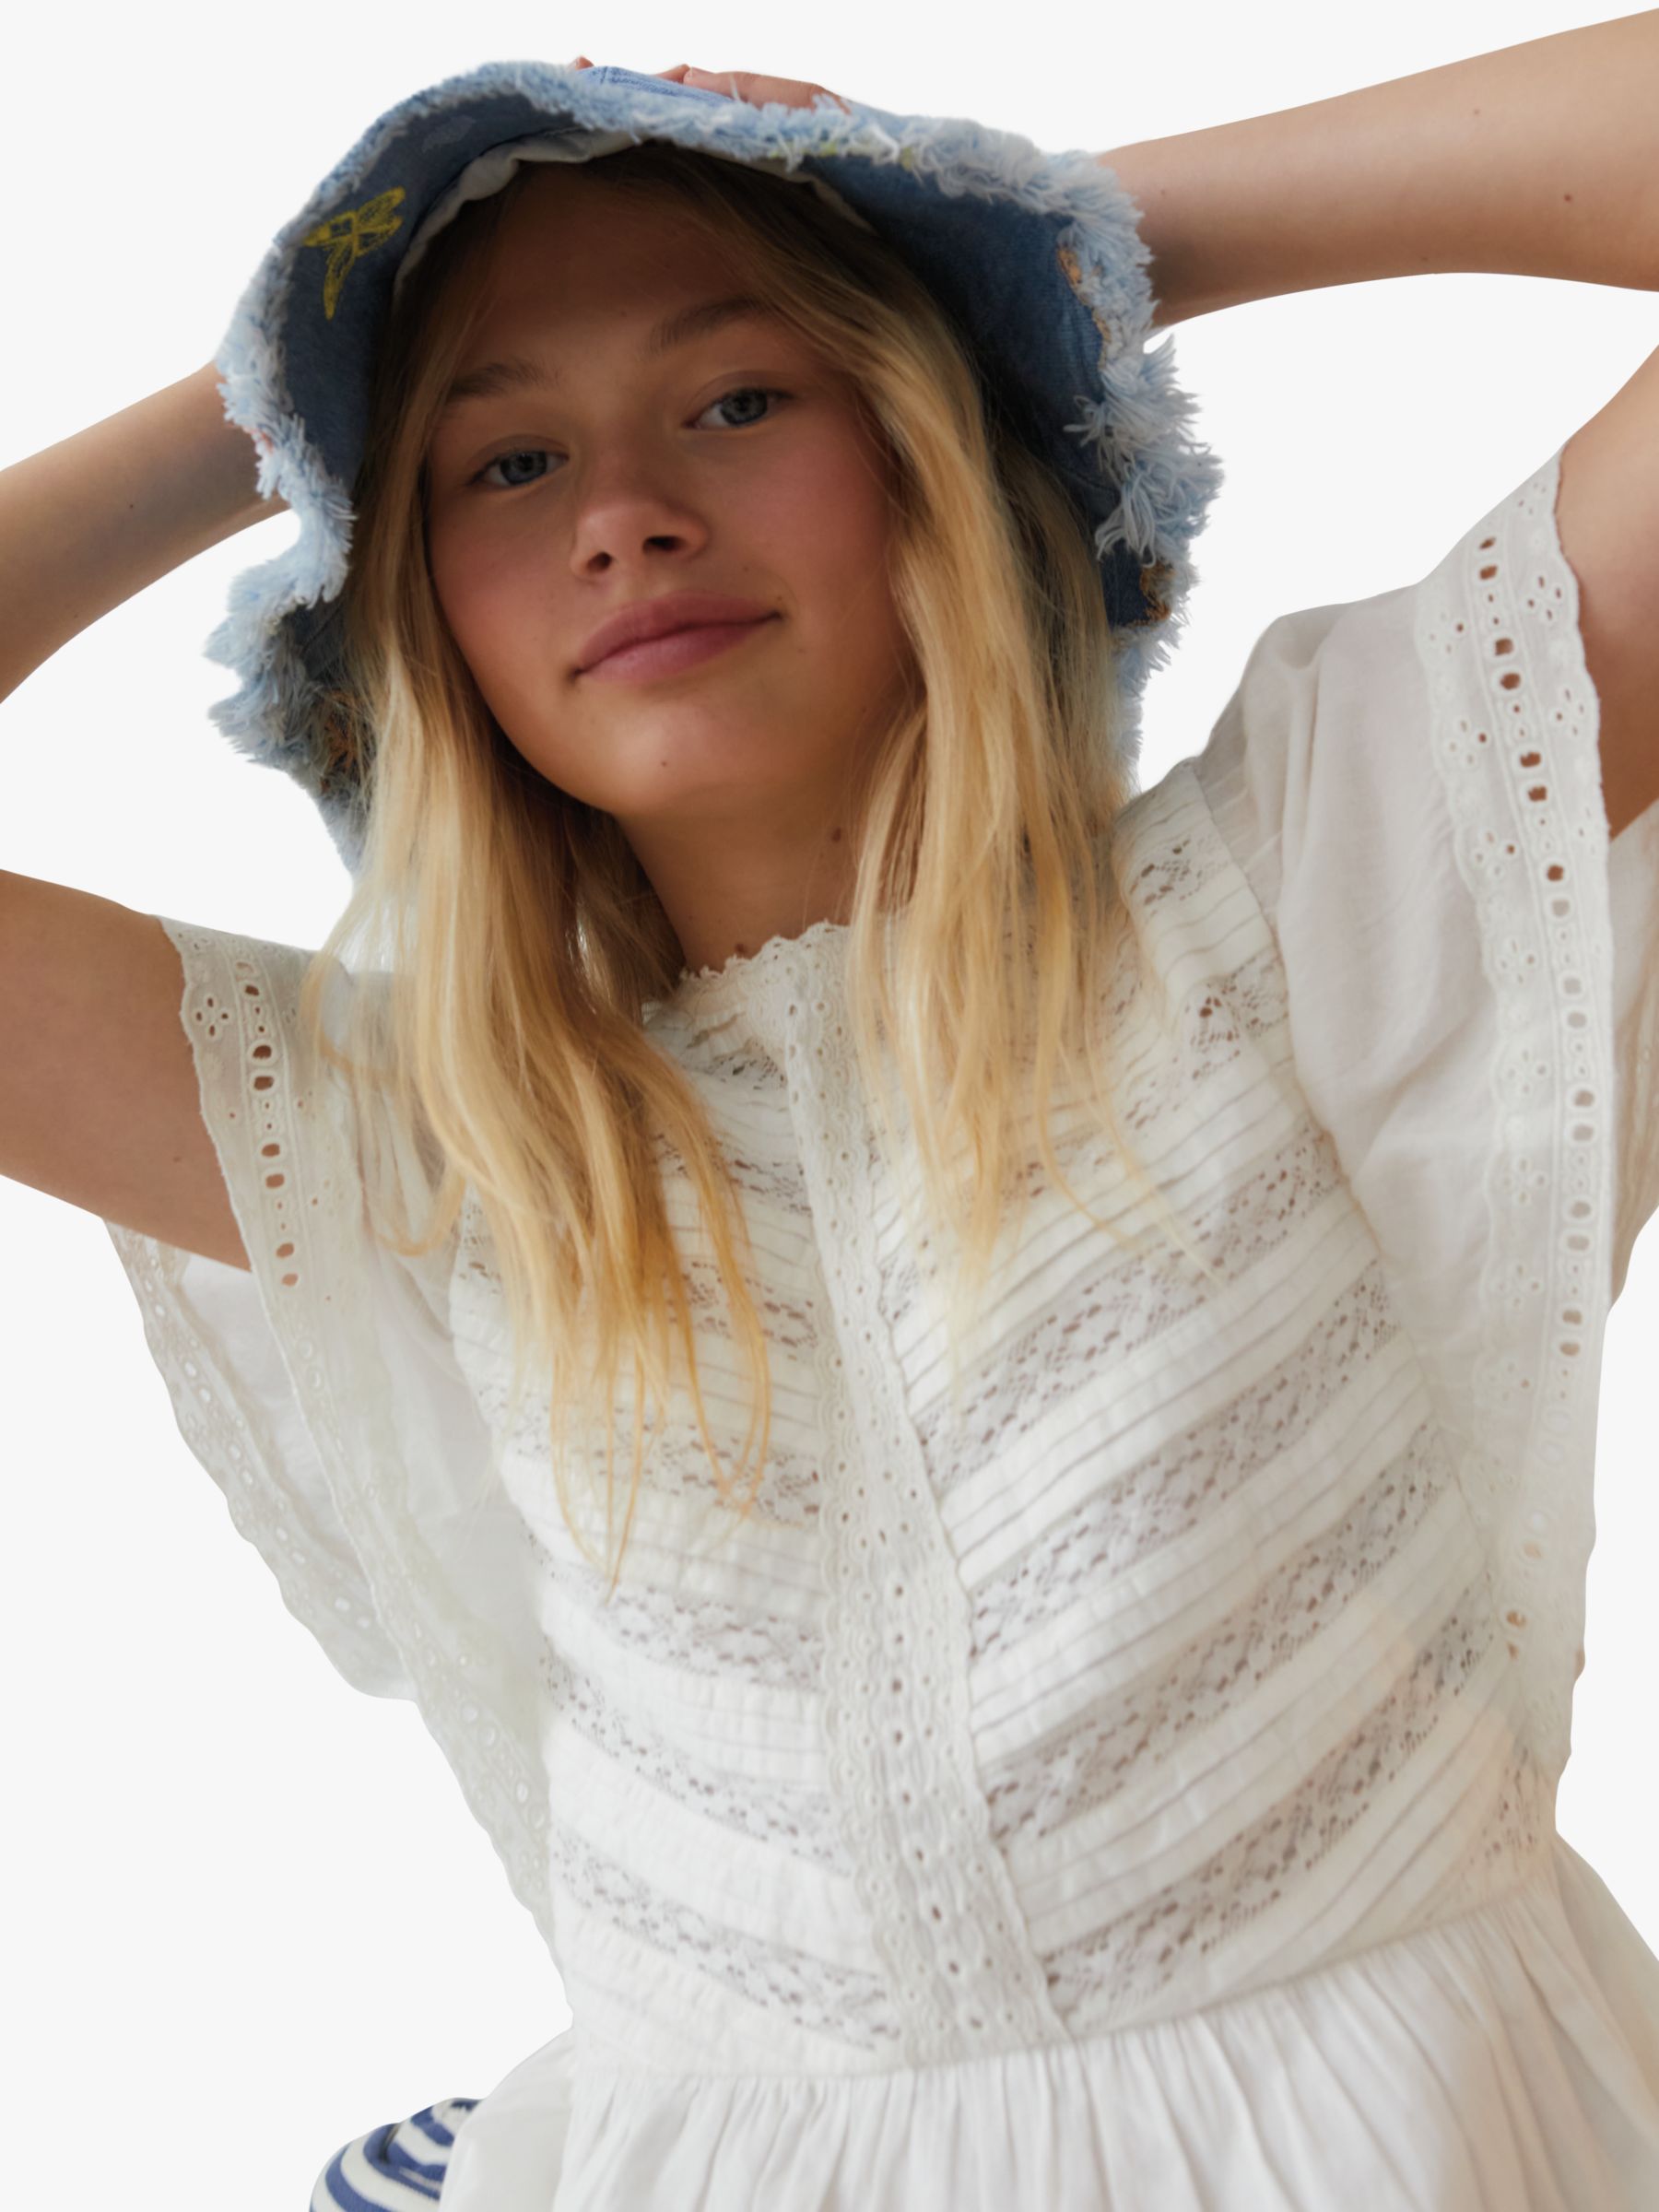 The New Society Kids' Downey Lace Detail Dress, Off White, 8 years